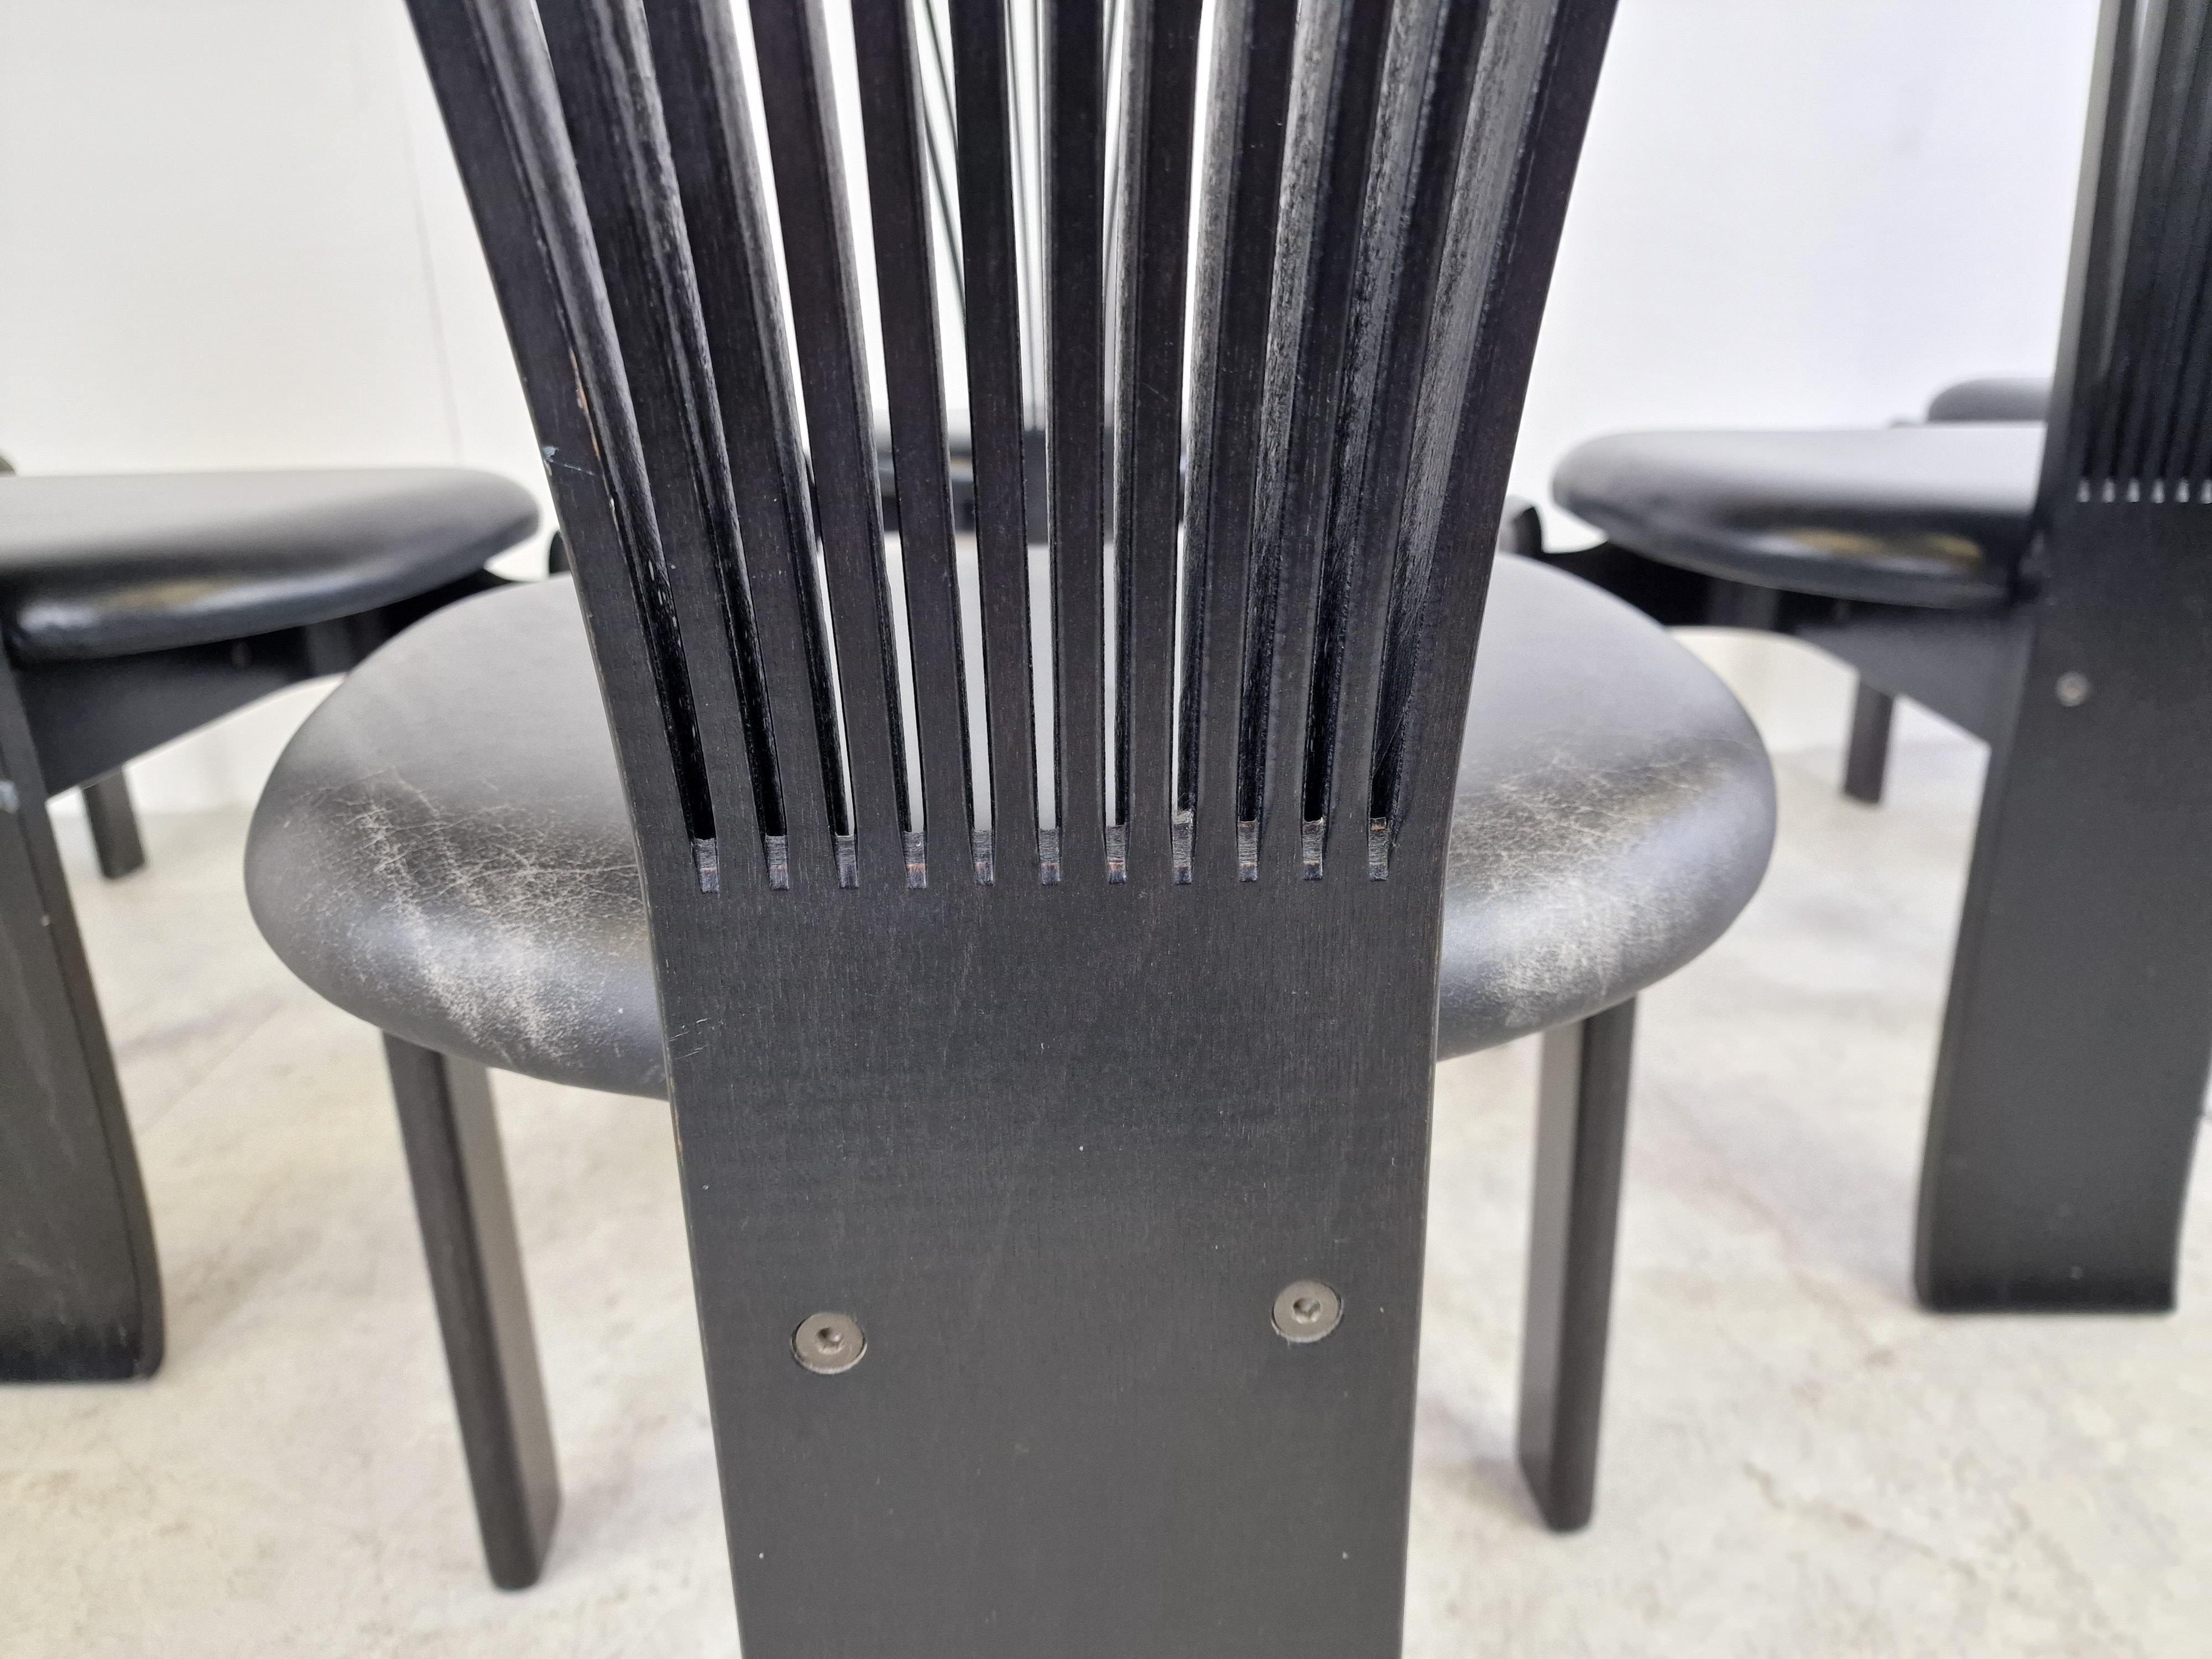 Scandinavian Postmodern diing chairs designed by Torsten Nilsen for Westnofa.

Striking design with ebonized wooden frames and leather seats.

Good overall condition.

1980s - Norway

Dimensions:
Height: 87cm/34.25